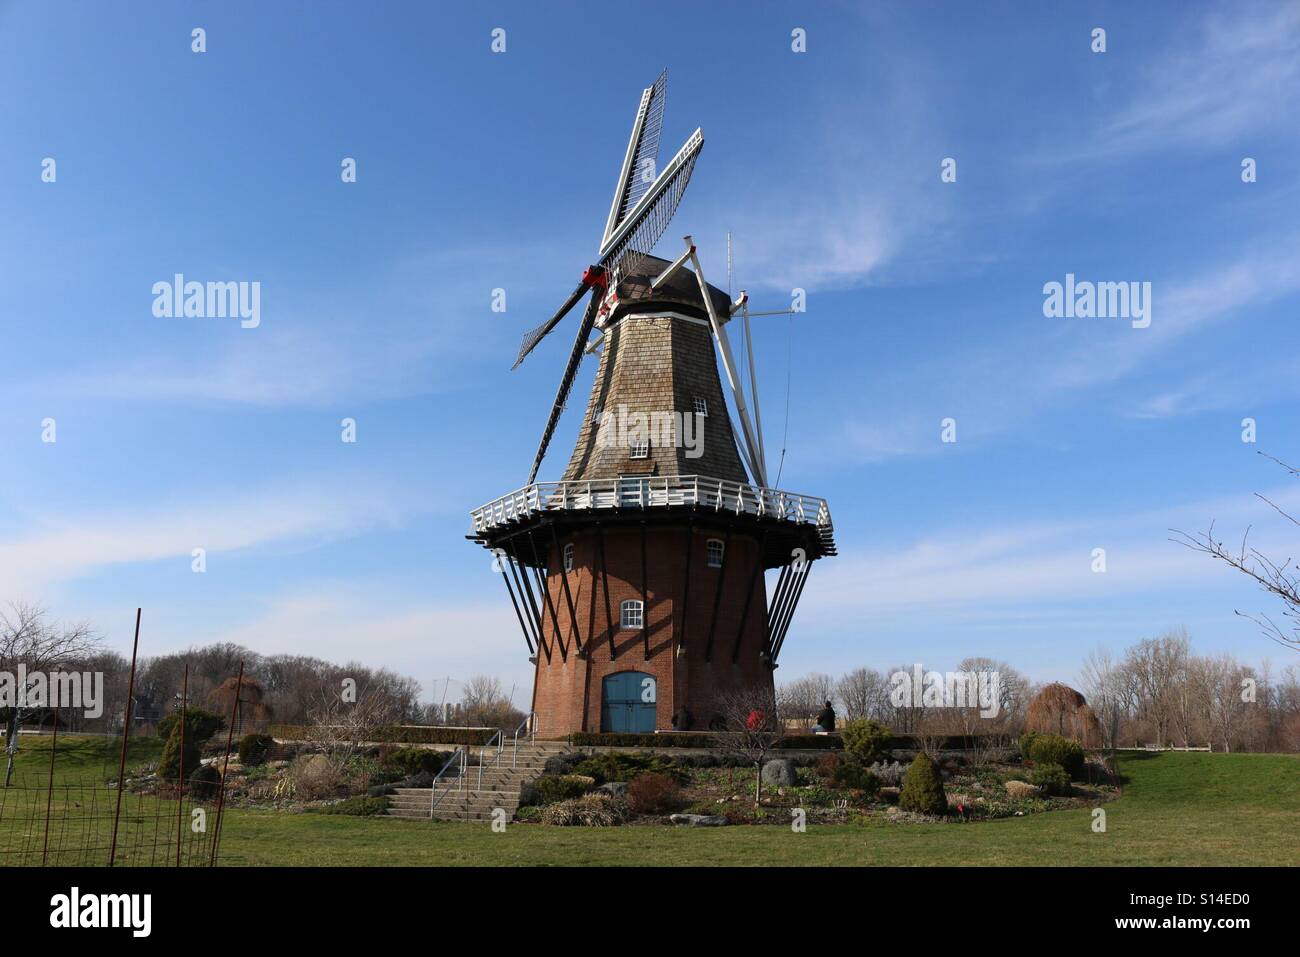 Windmill on blue clear day in Holland, Michigan Stock Photo